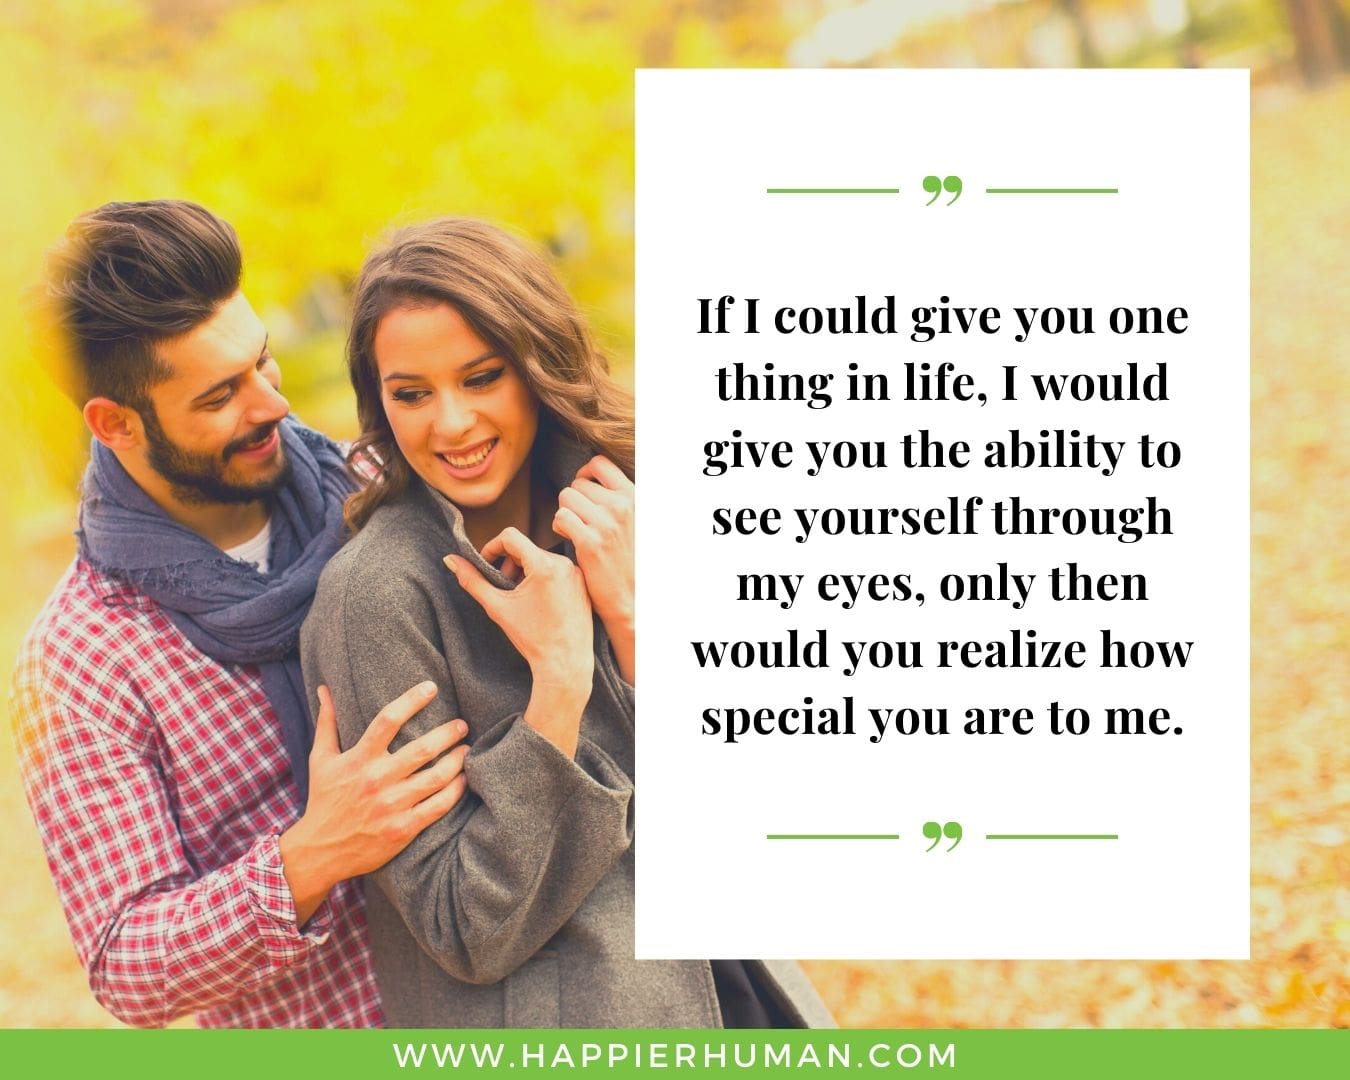 Sweet and Romantic Love Quotes for Her - “If I could give you one thing in life, I would give you the ability to see yourself through my eyes, only then would you realize how special you are to me.”